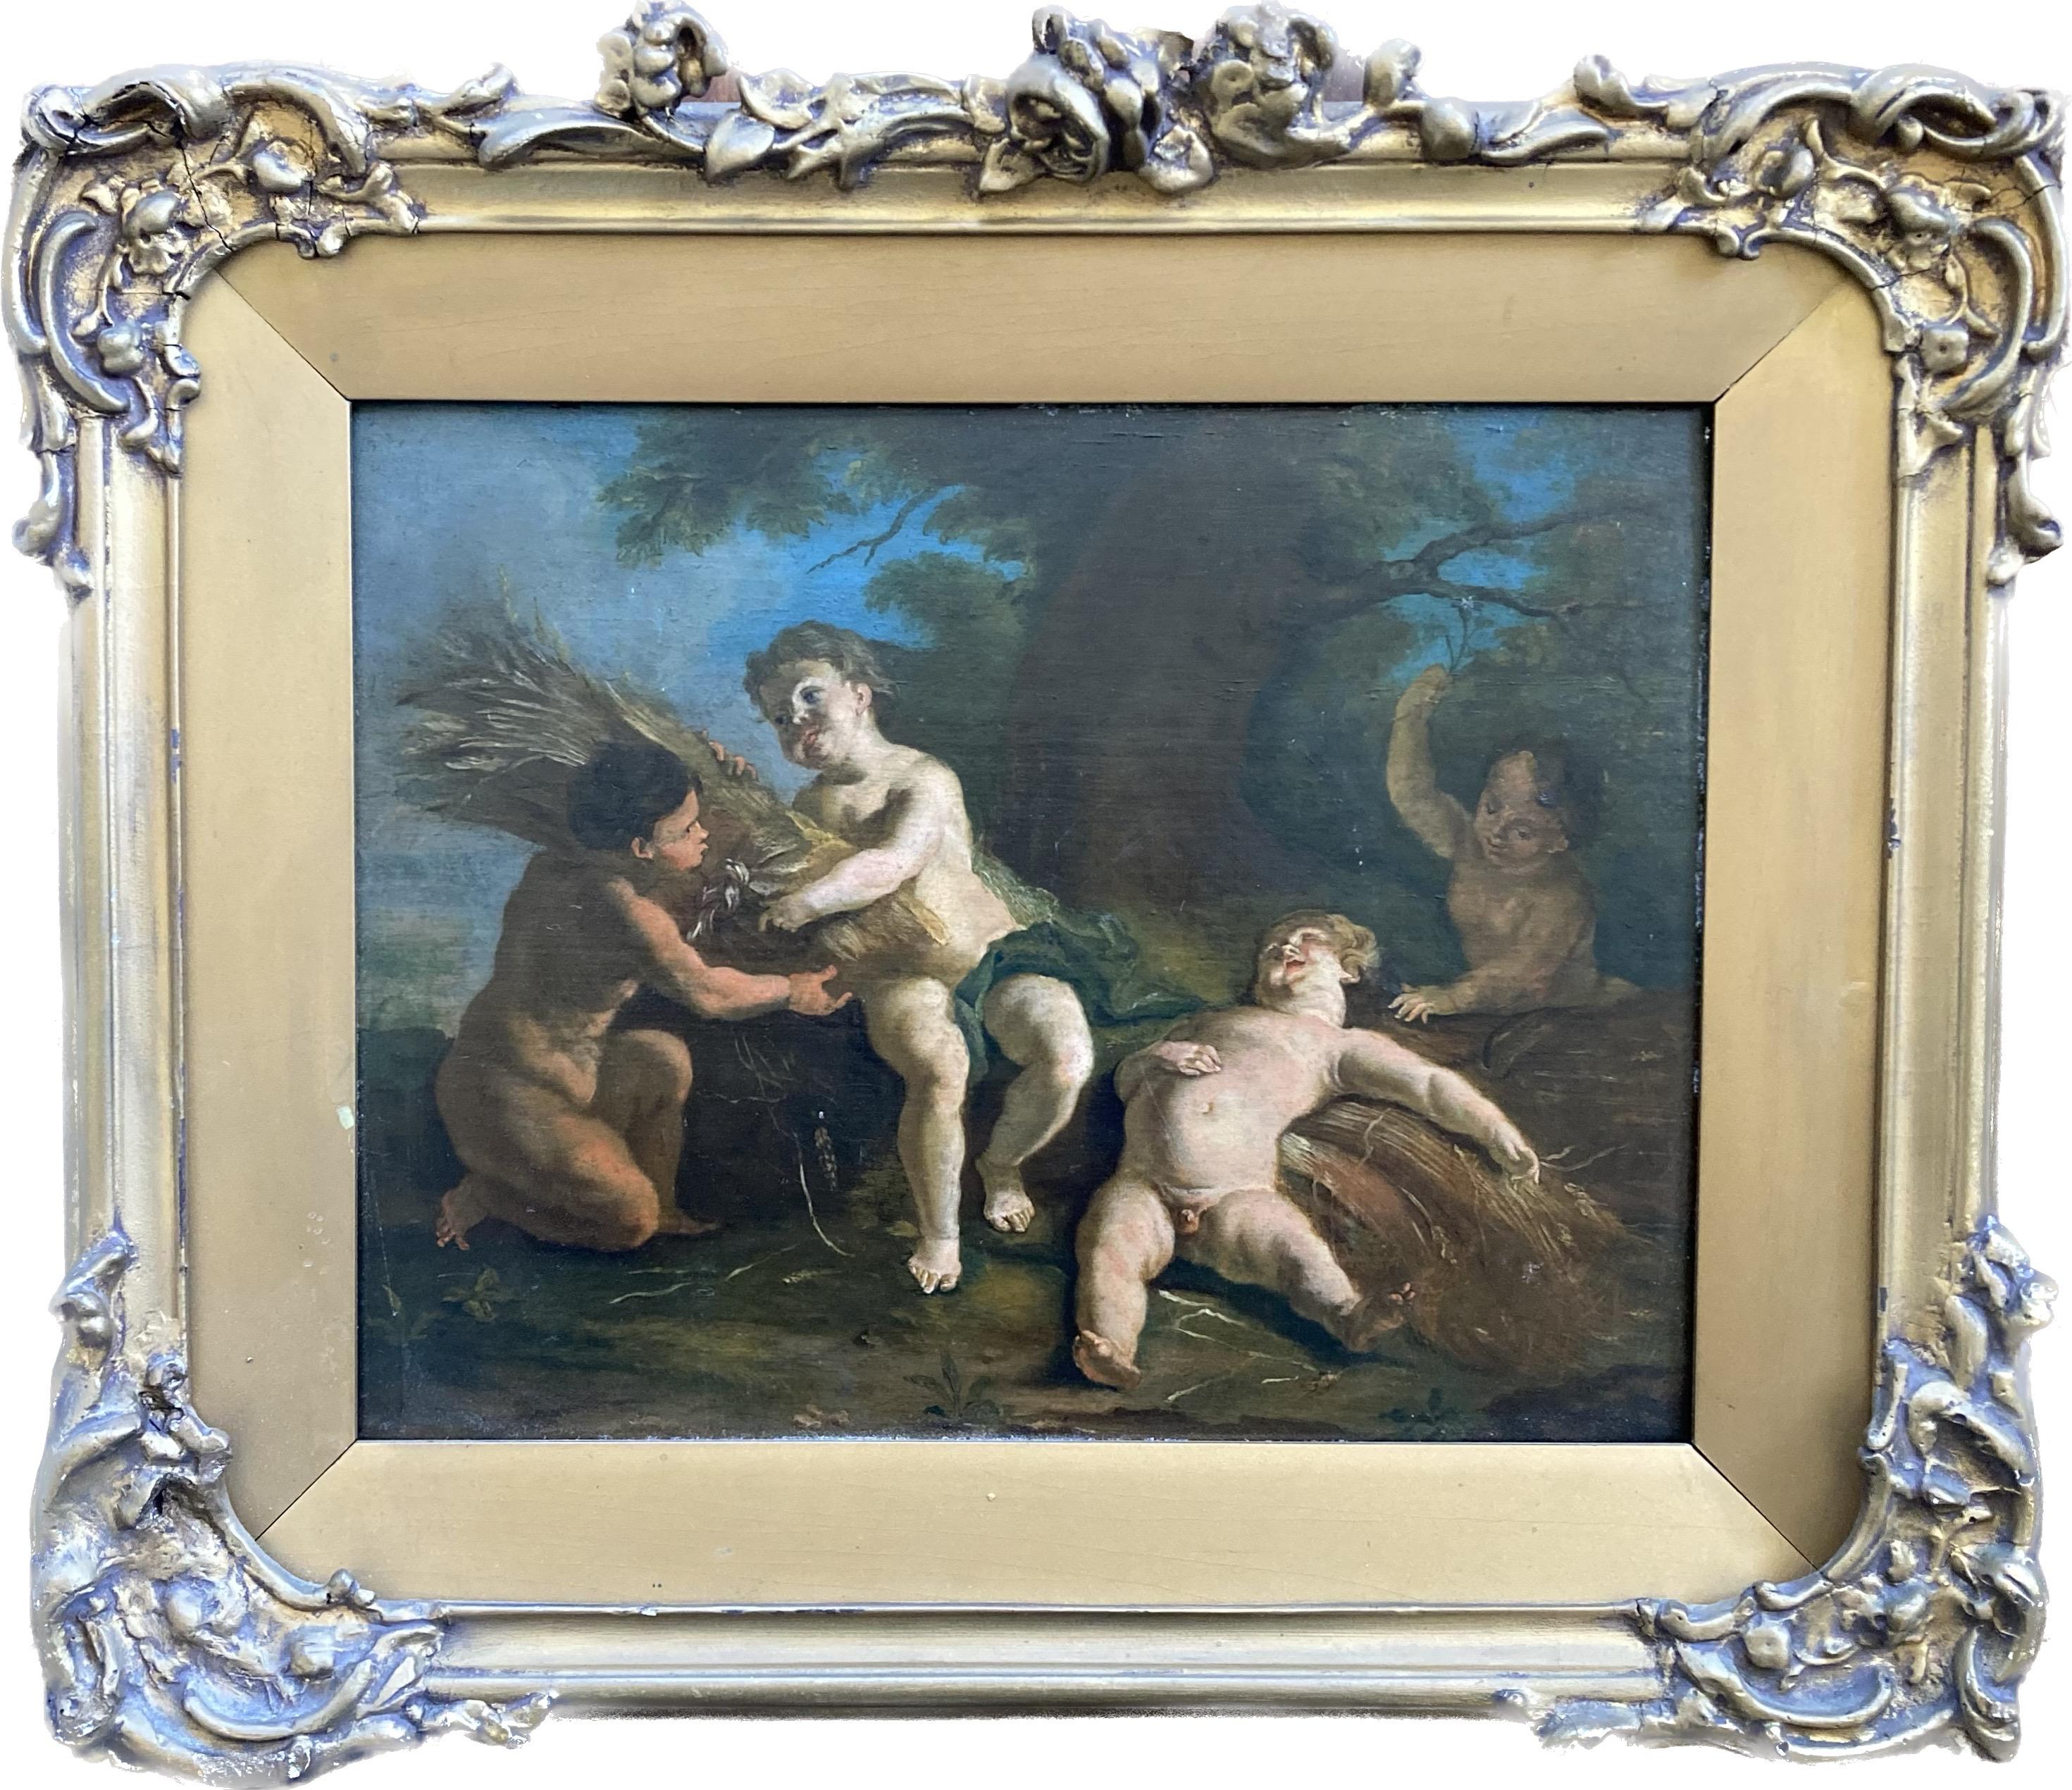 Old master painting of Cherubs cavorting in a woodland setting